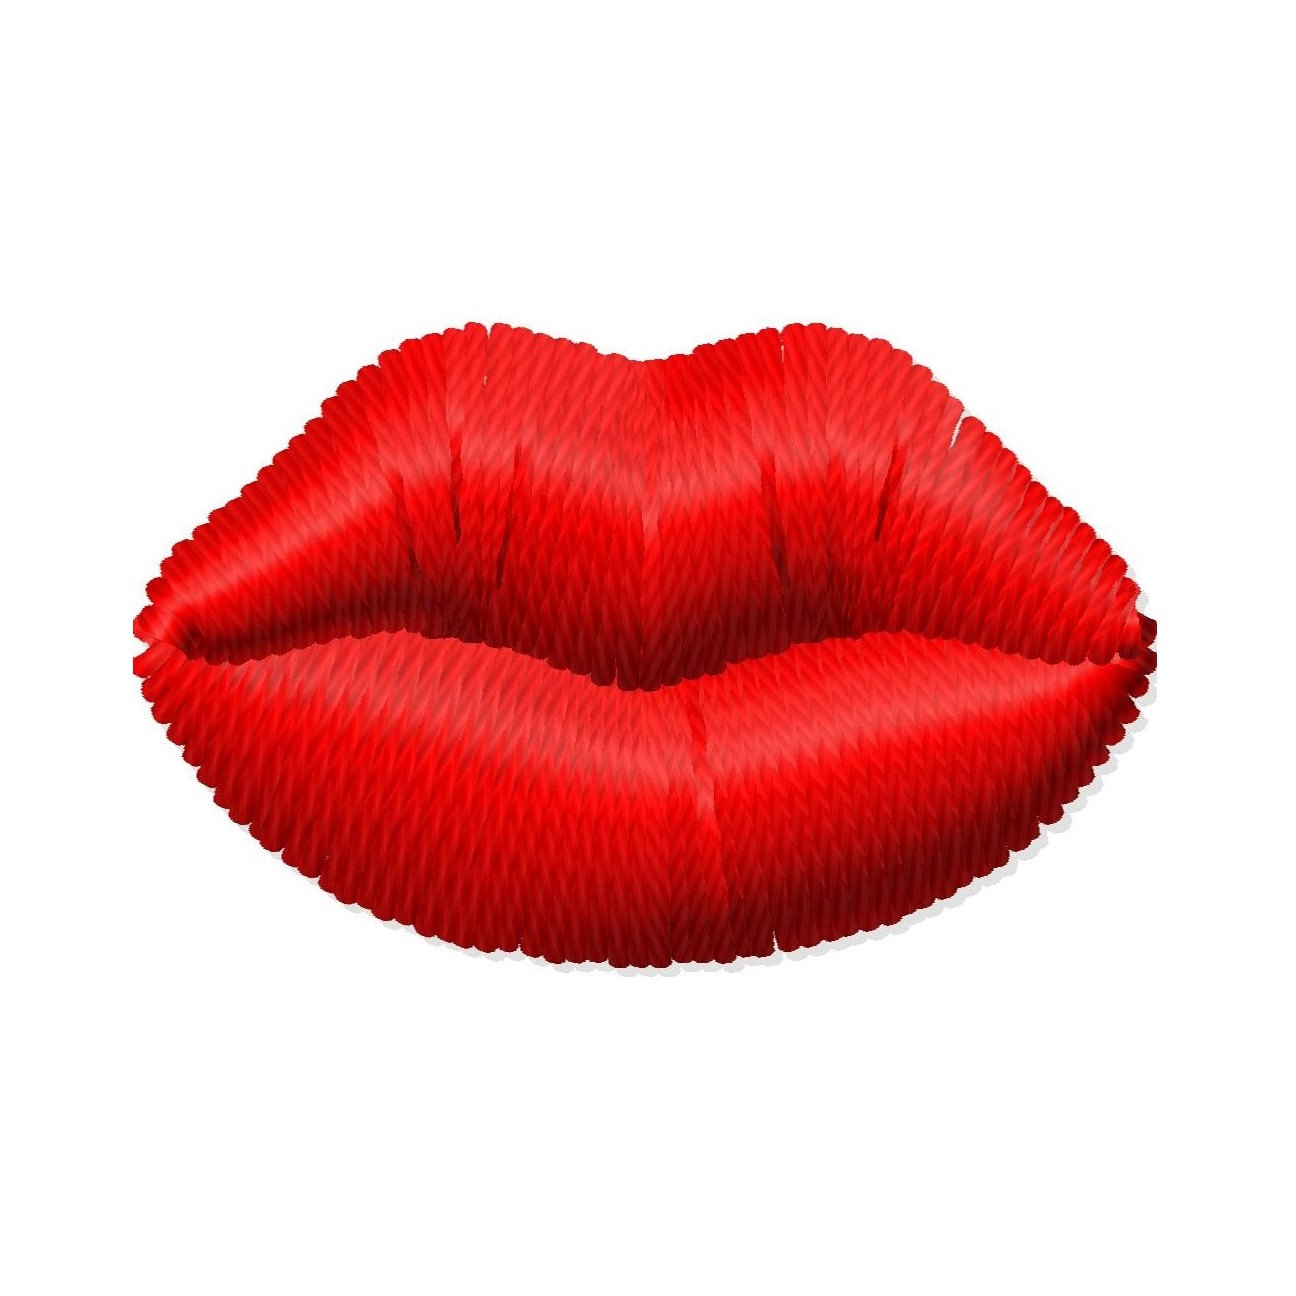 The clip art directory lips clipart illustrations image 0